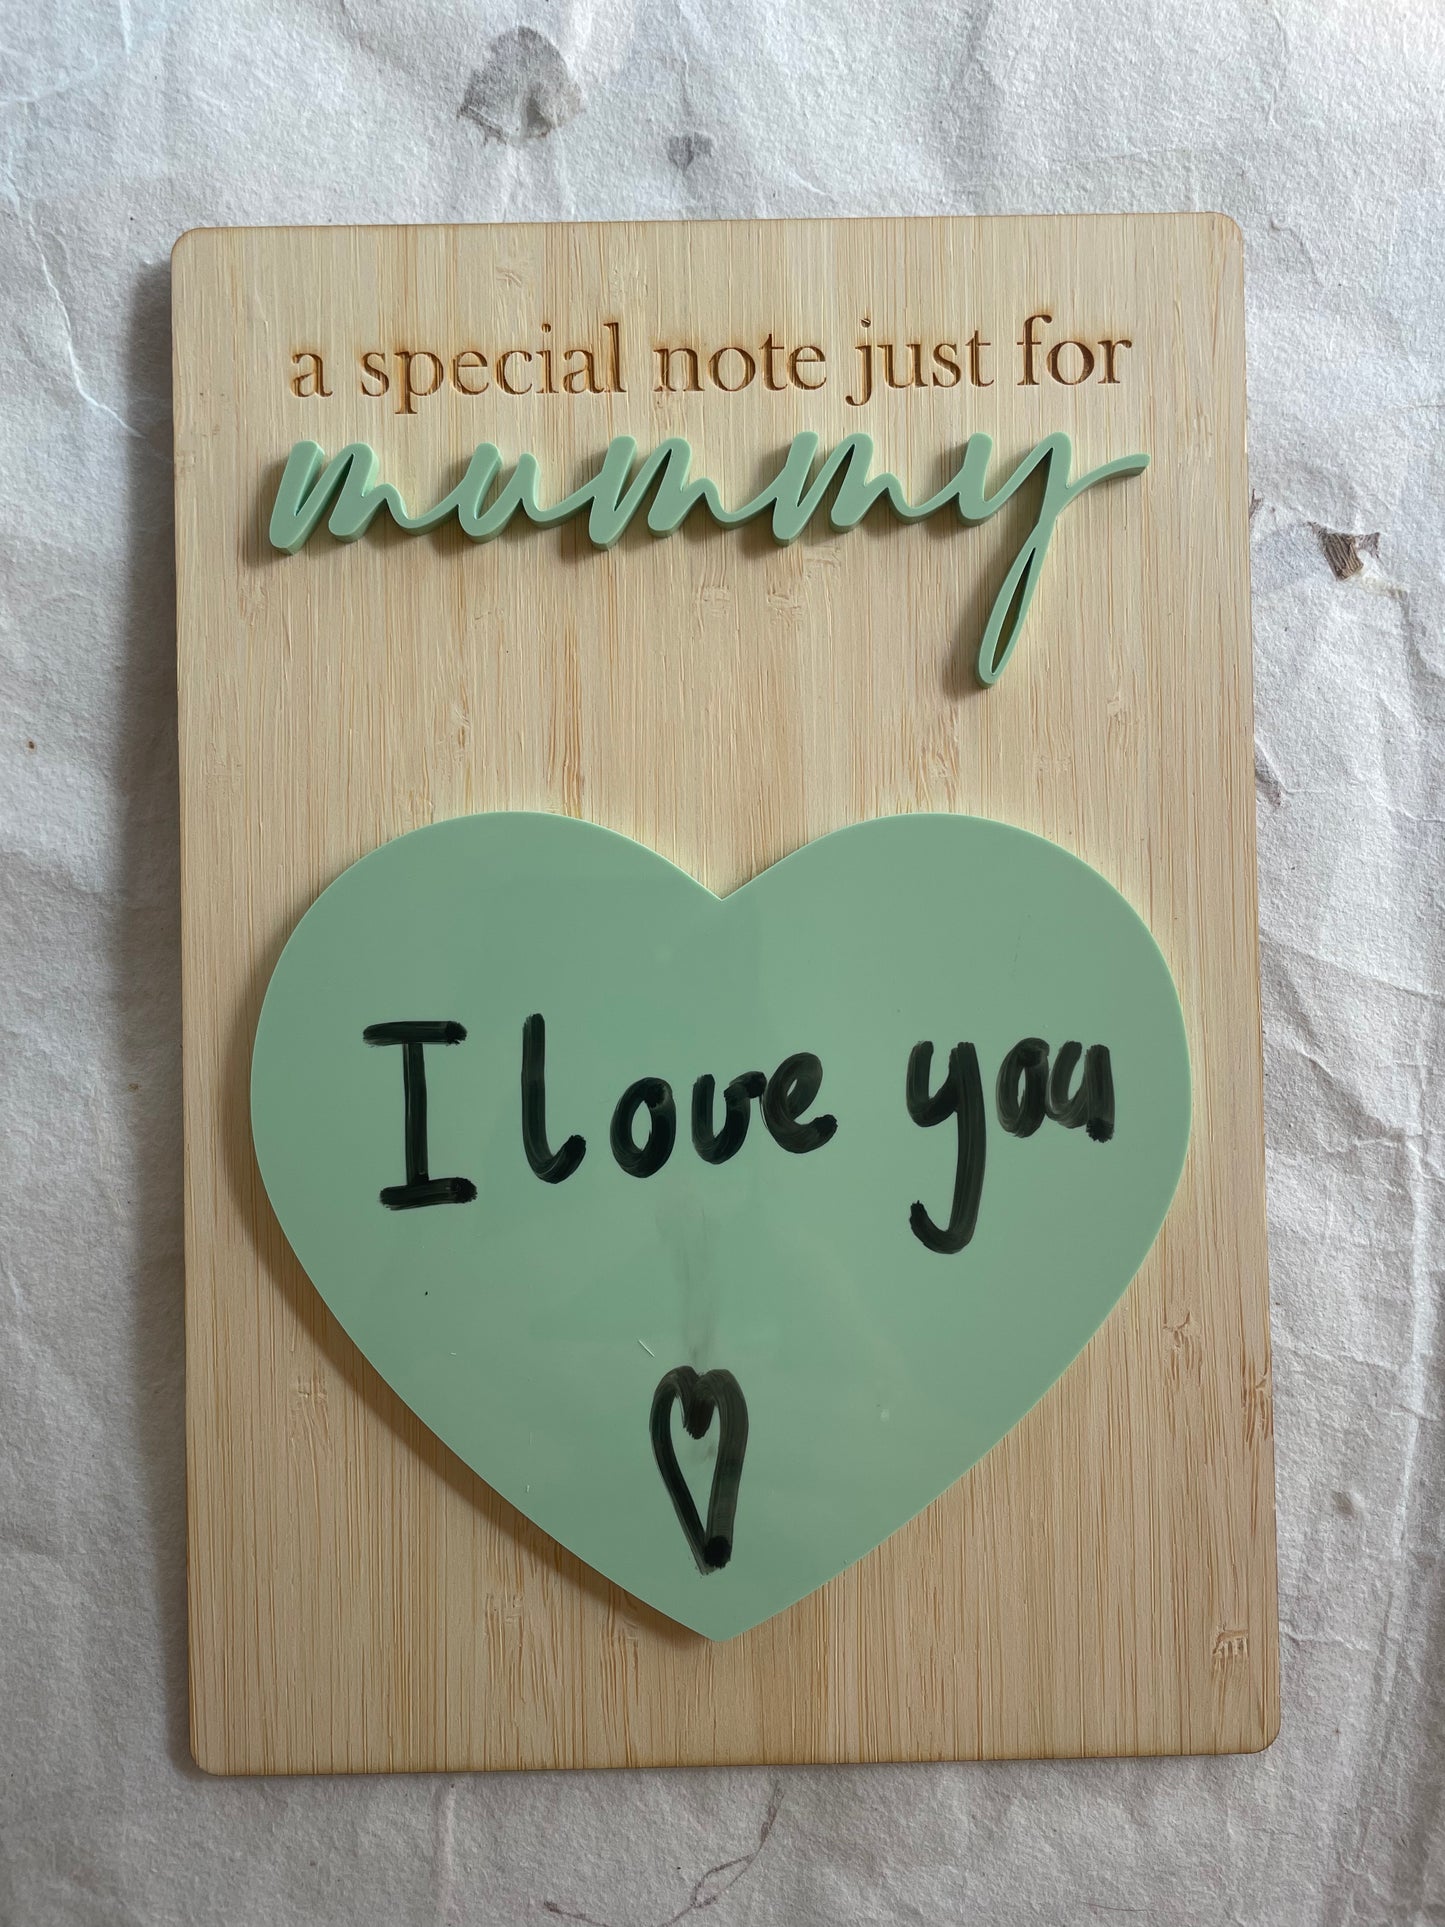 “A special note” fridge magnet